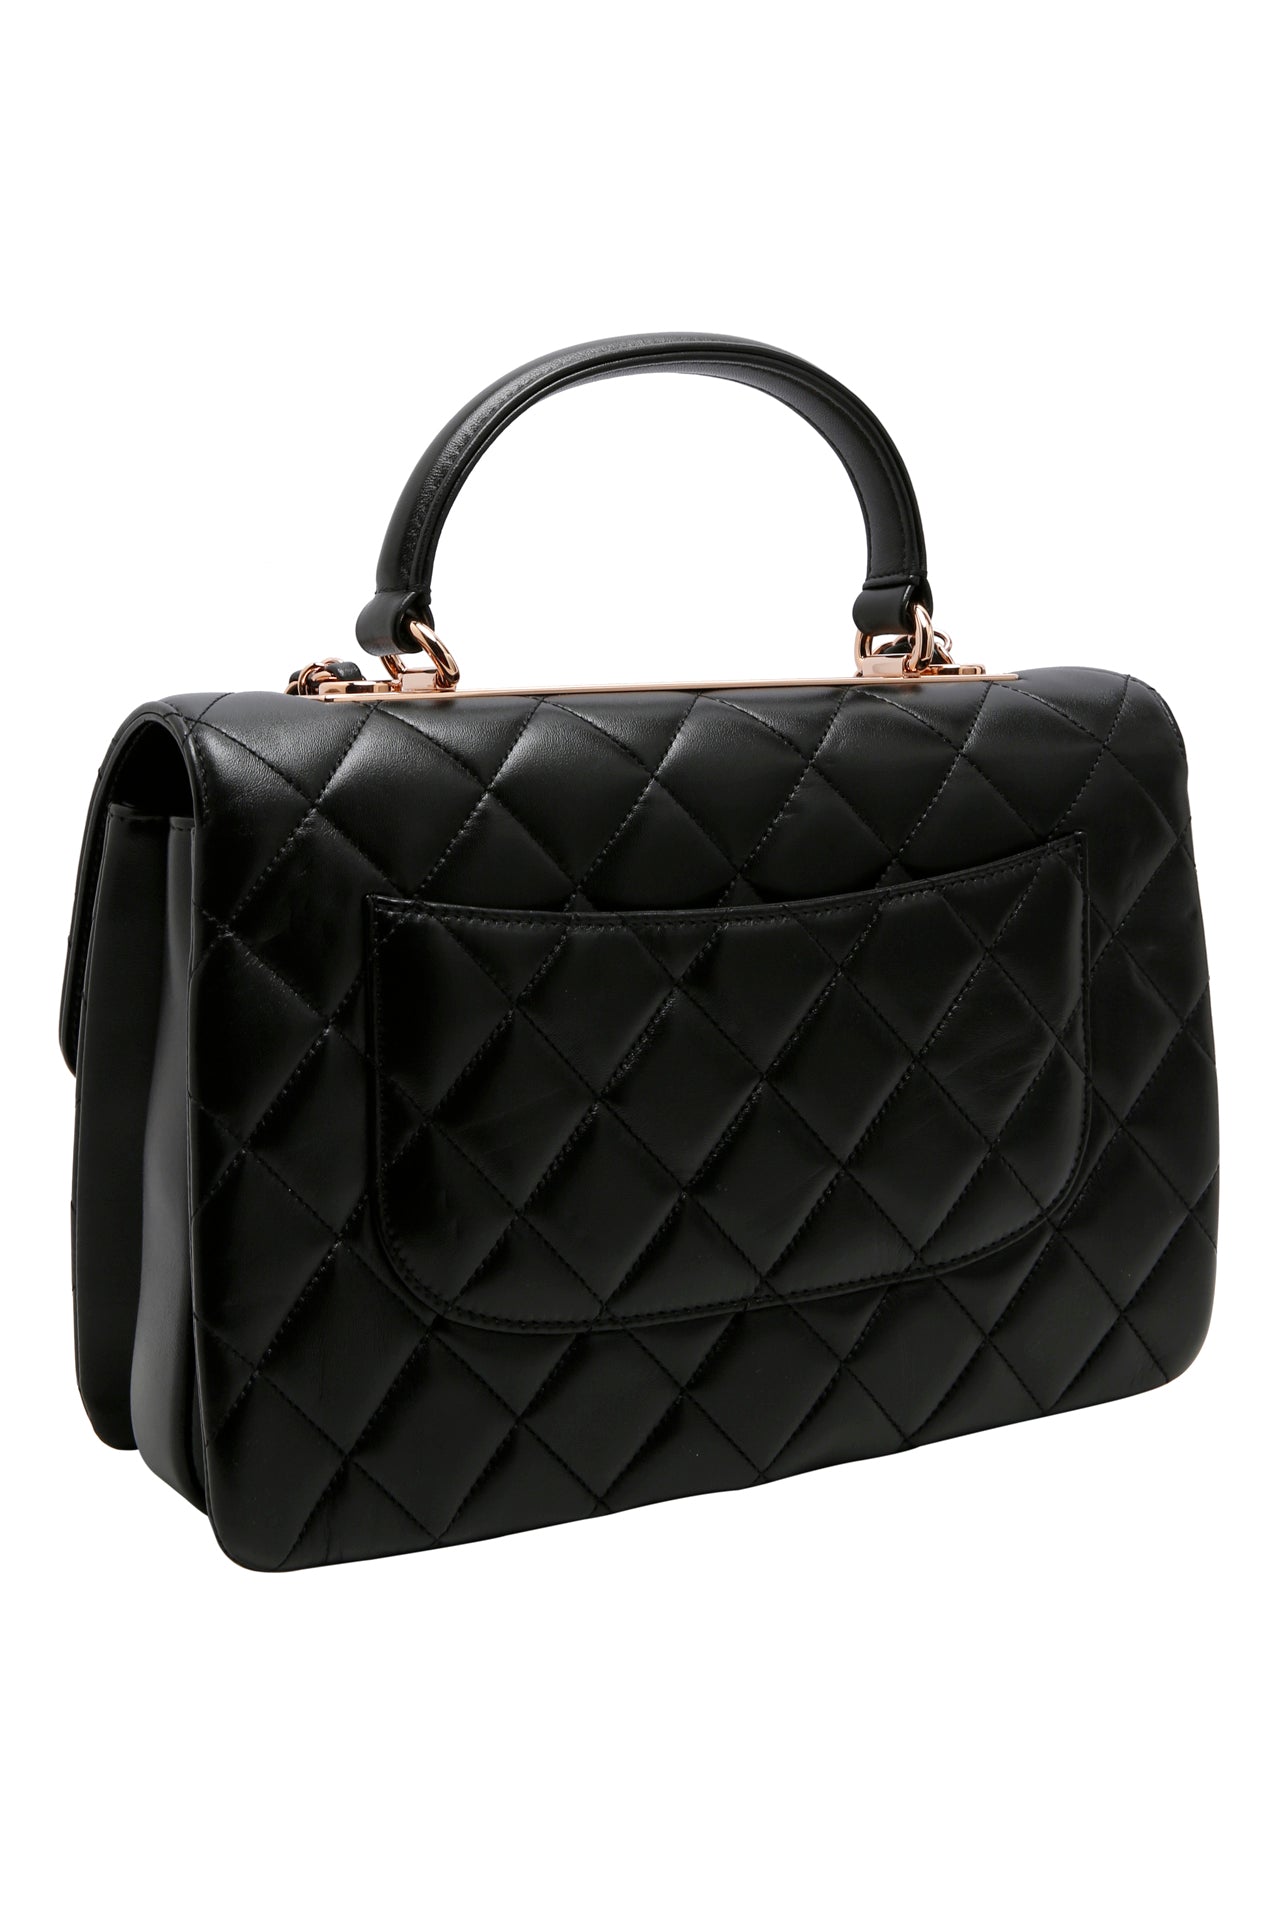 Chanel Lambskin Quilted Trendy CC Flap Dual Handle Bag Black